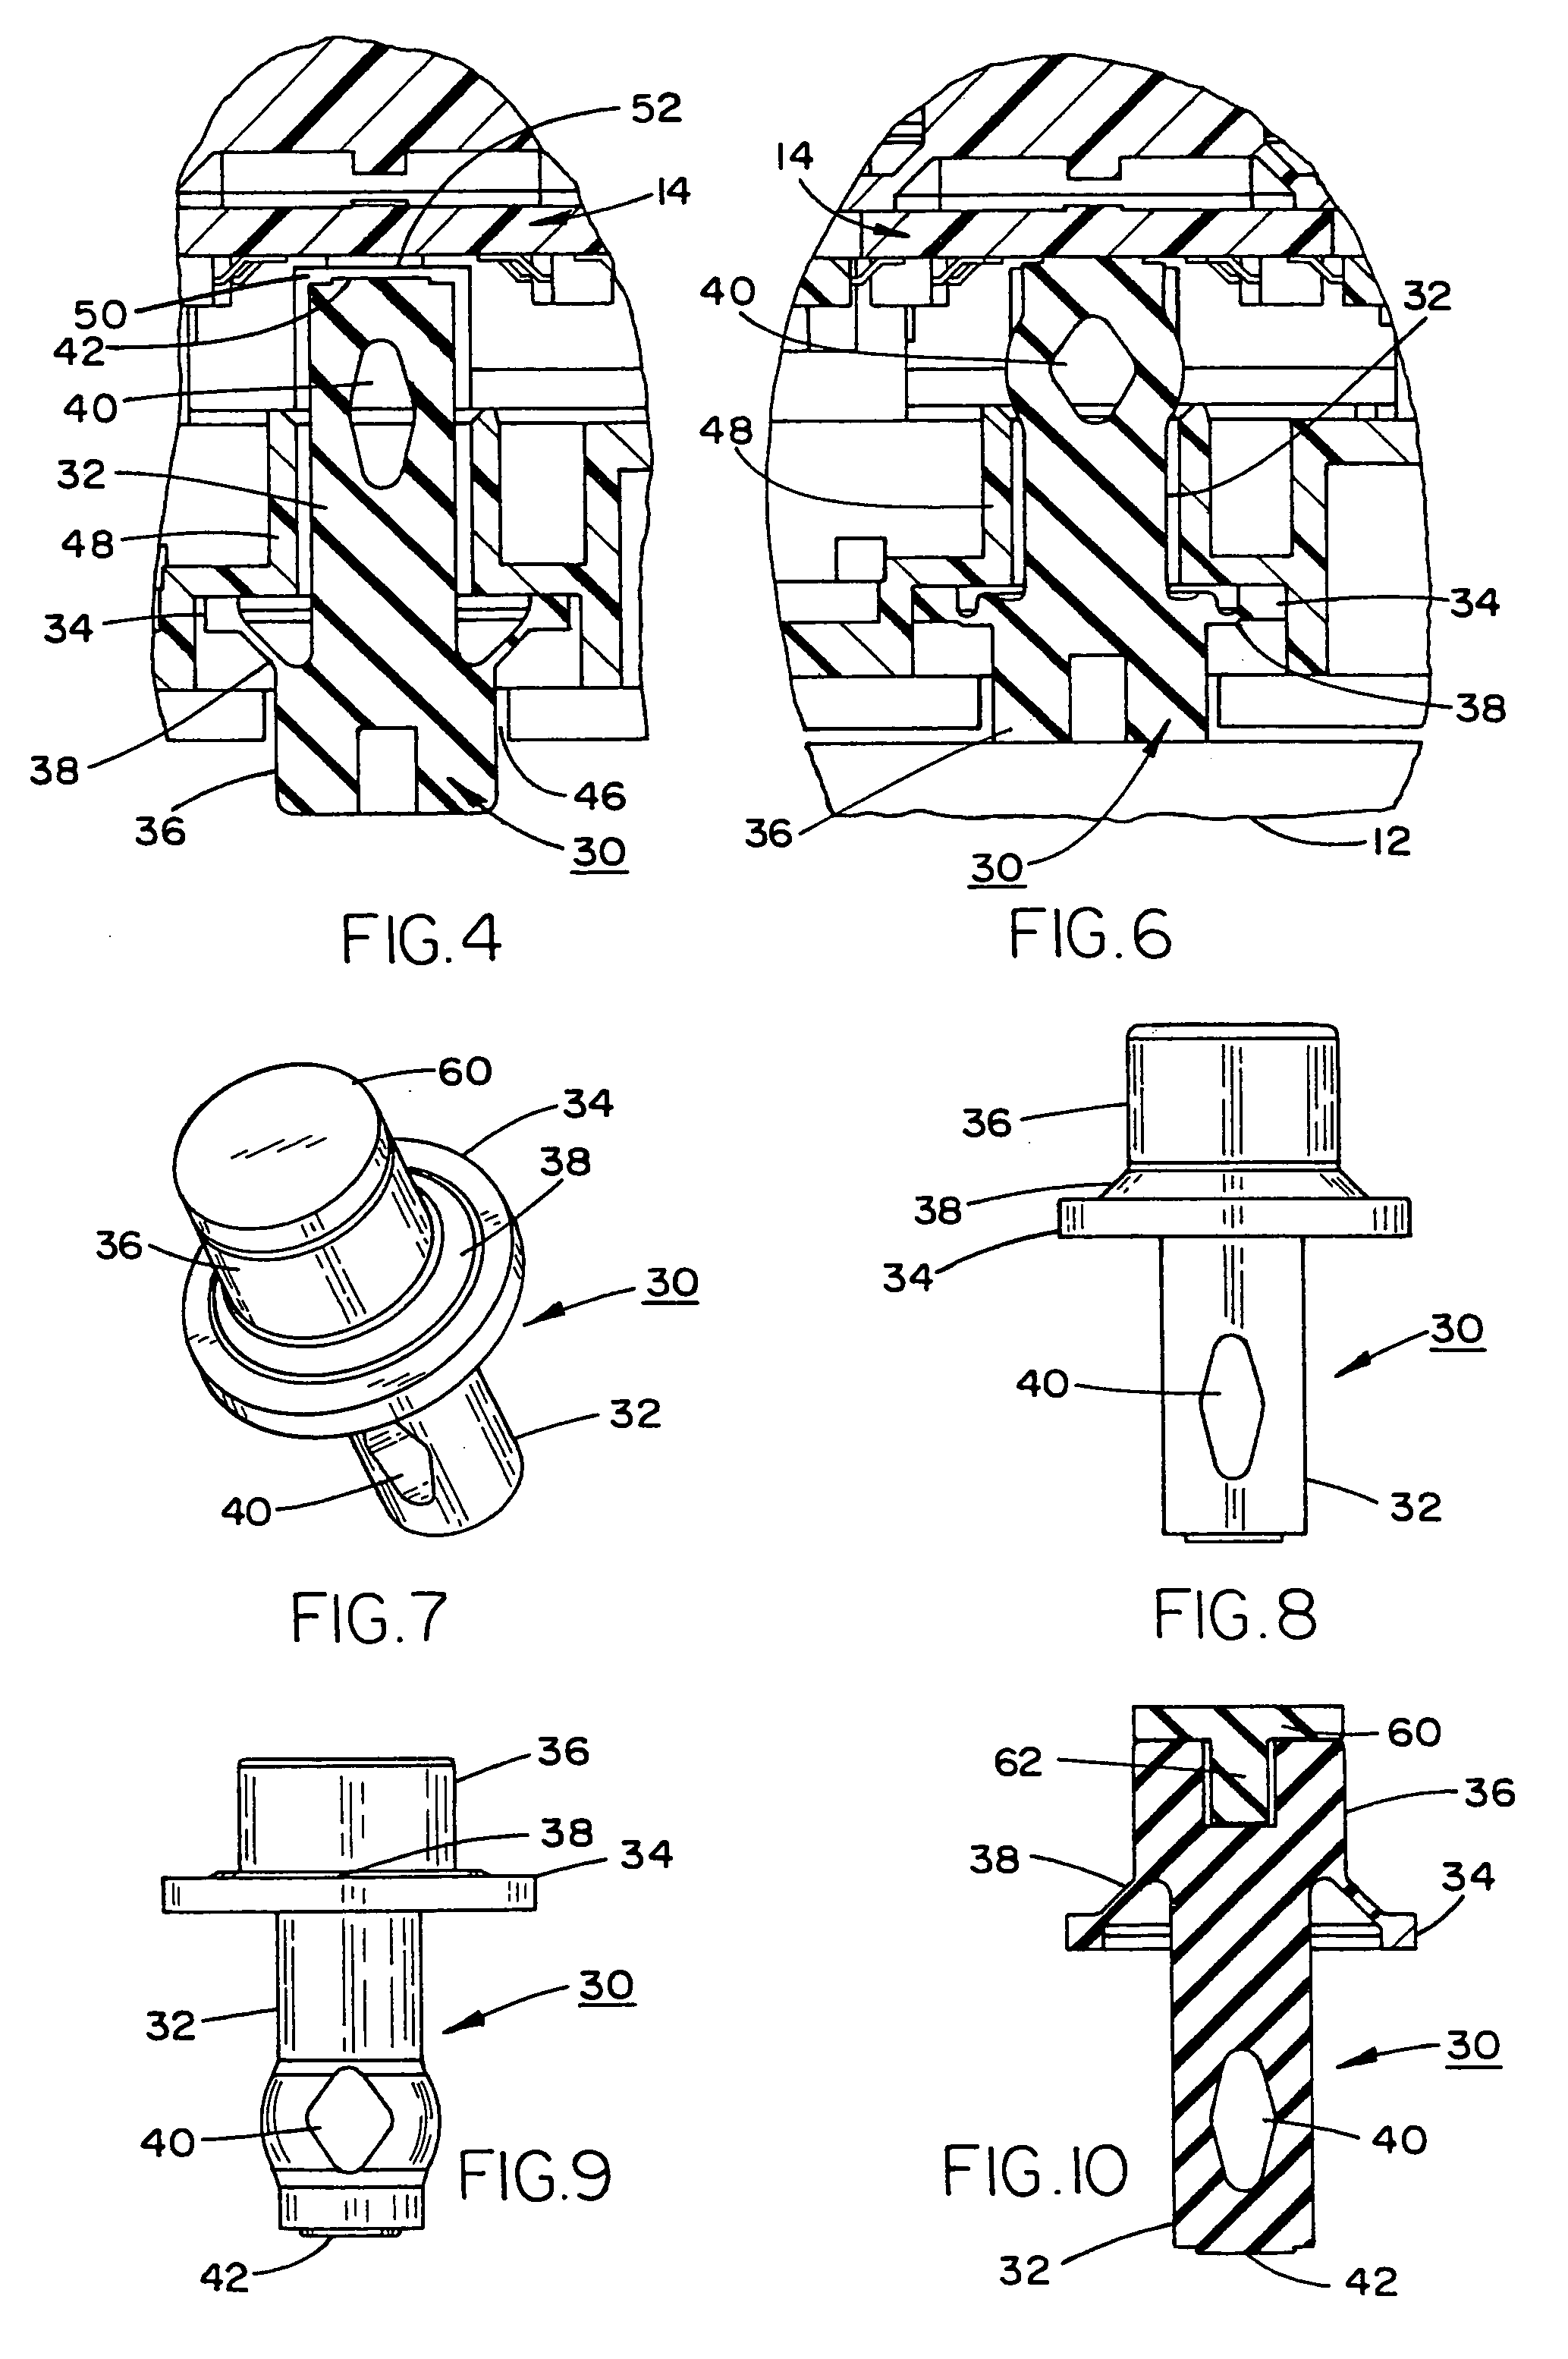 Conductive tamper switch for security devices